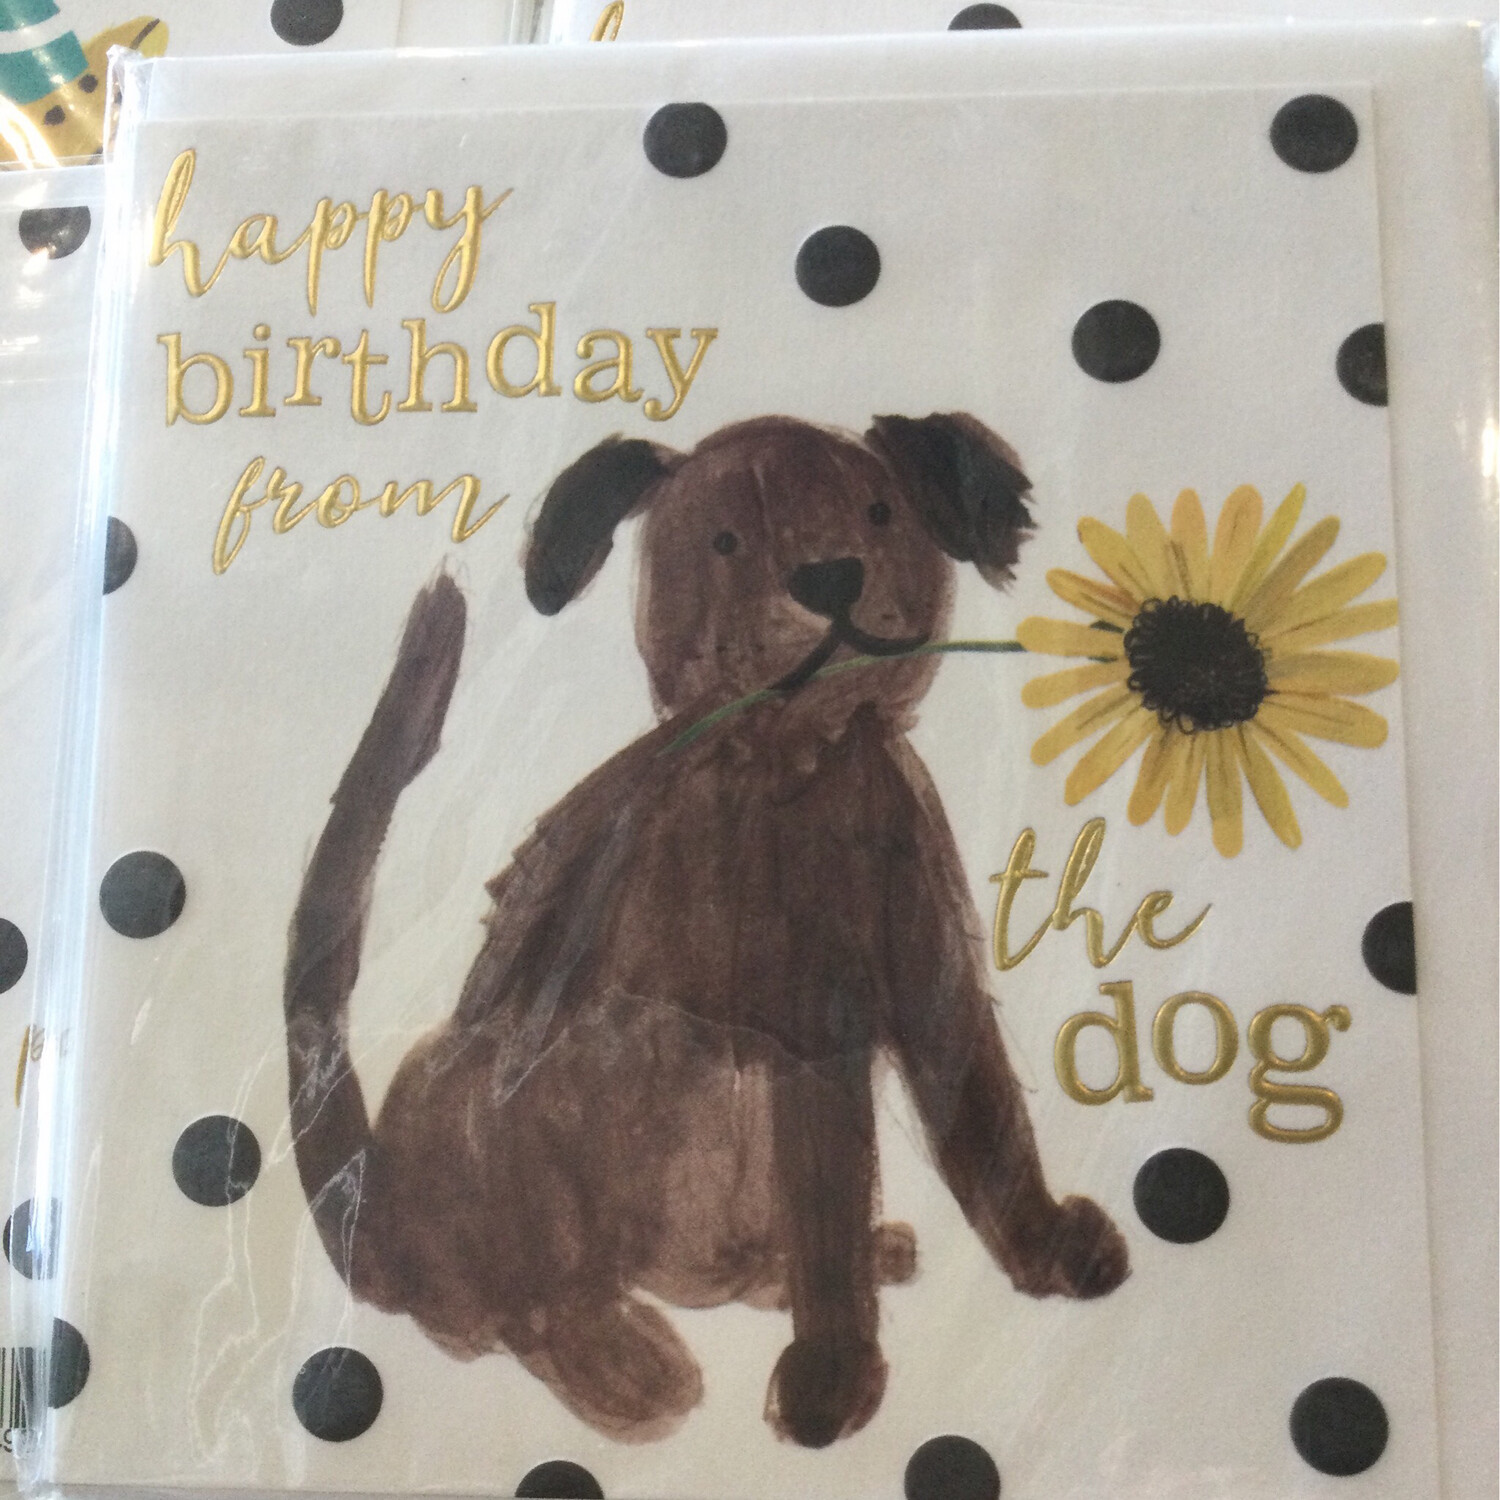 Happy Birthday From The Dog Card